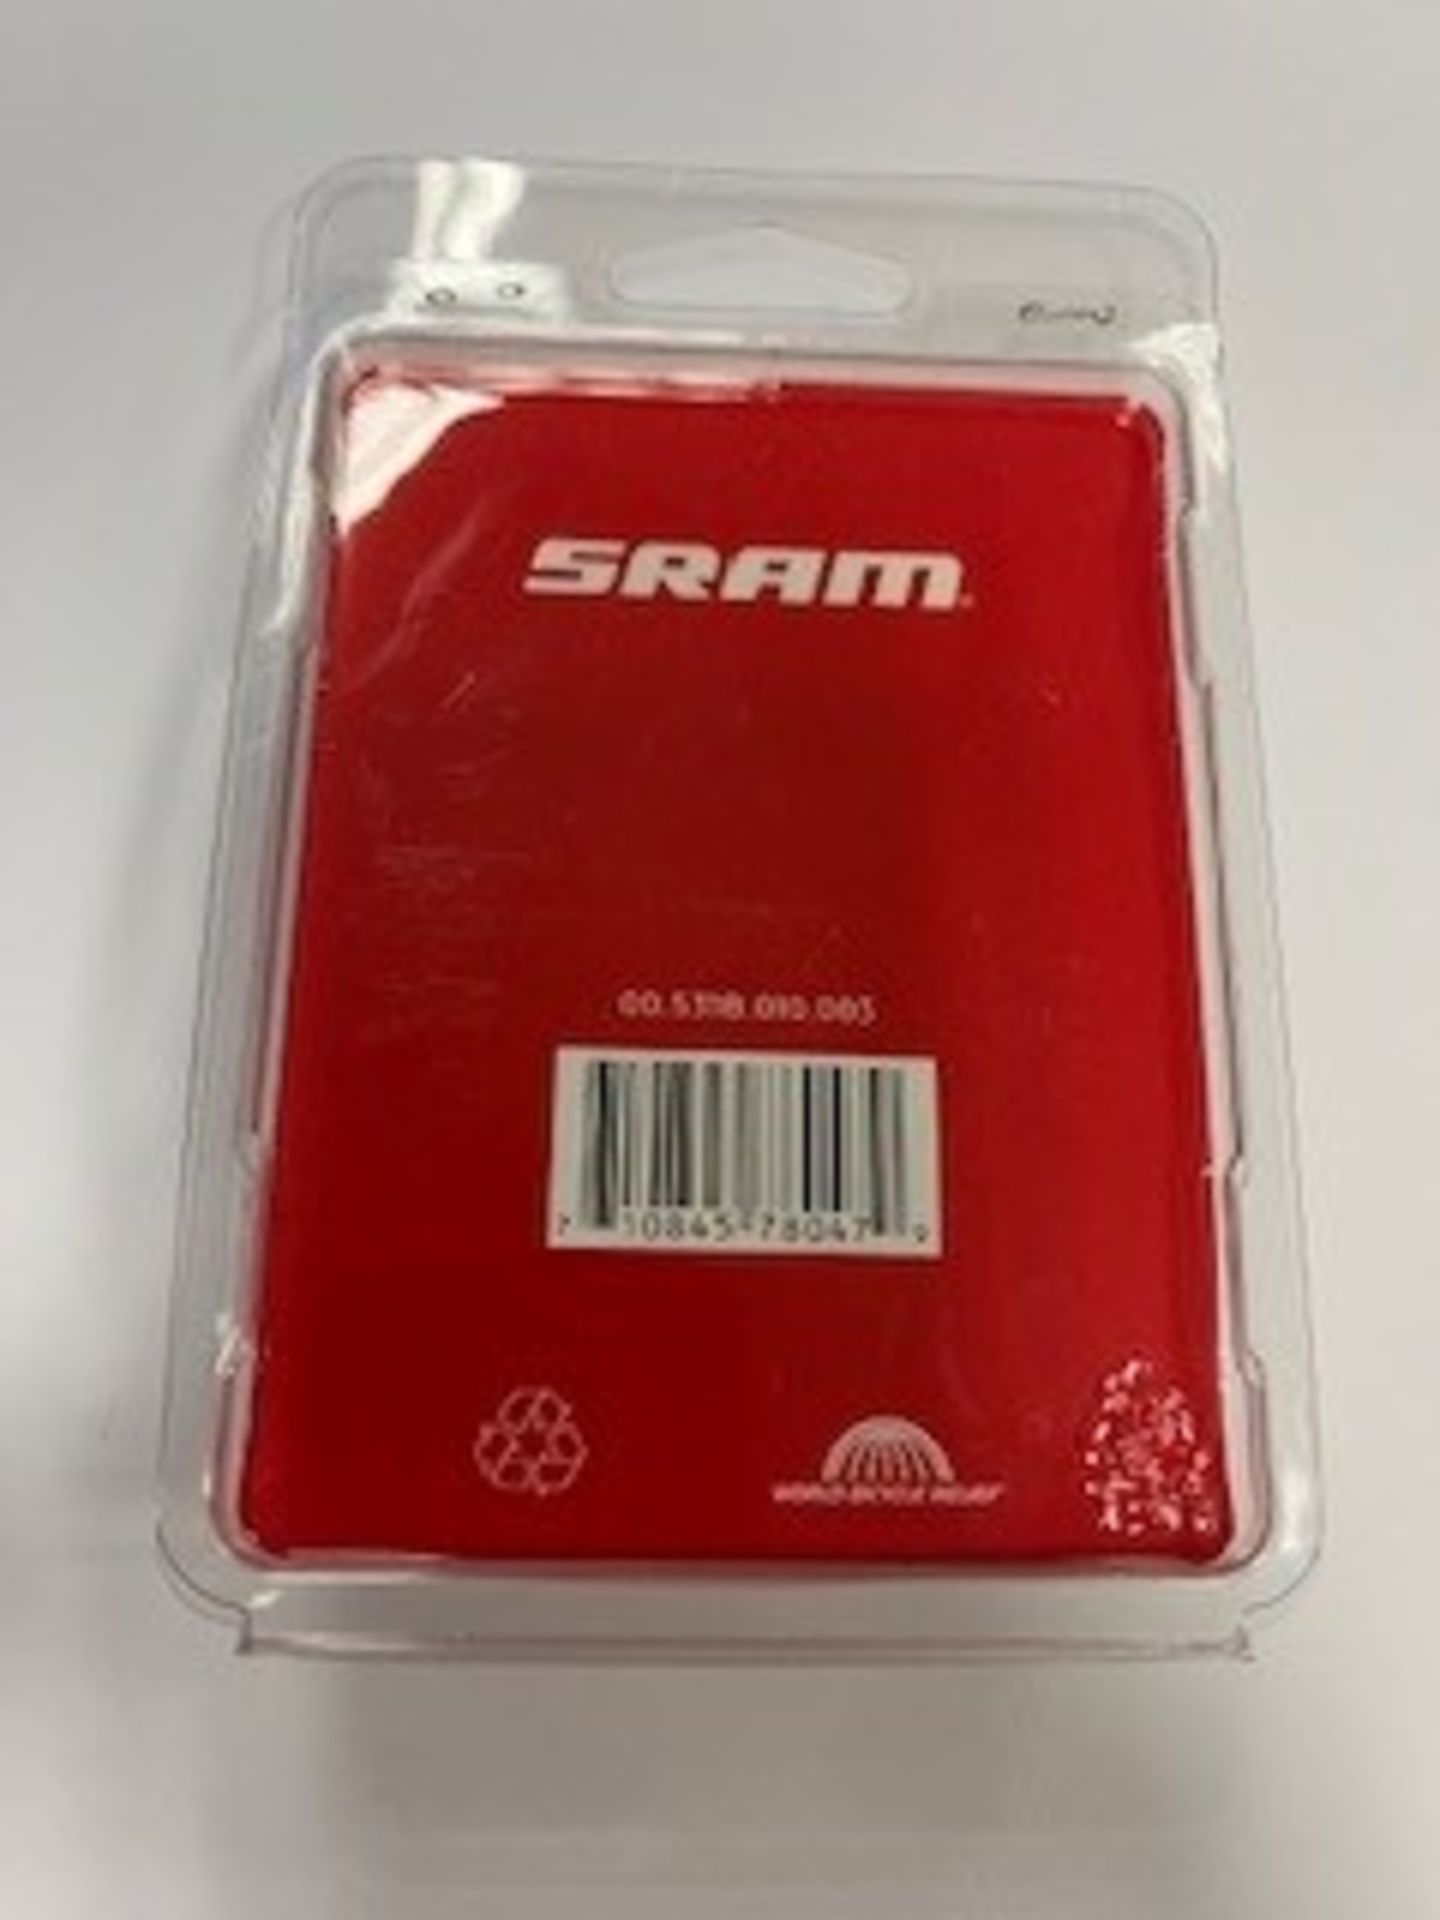 Sram Brake Pads to include 5x Disc Brake Pads Organic with Steel Backing Plate (HRD, LEVEL ULT, LEVE - Image 6 of 9